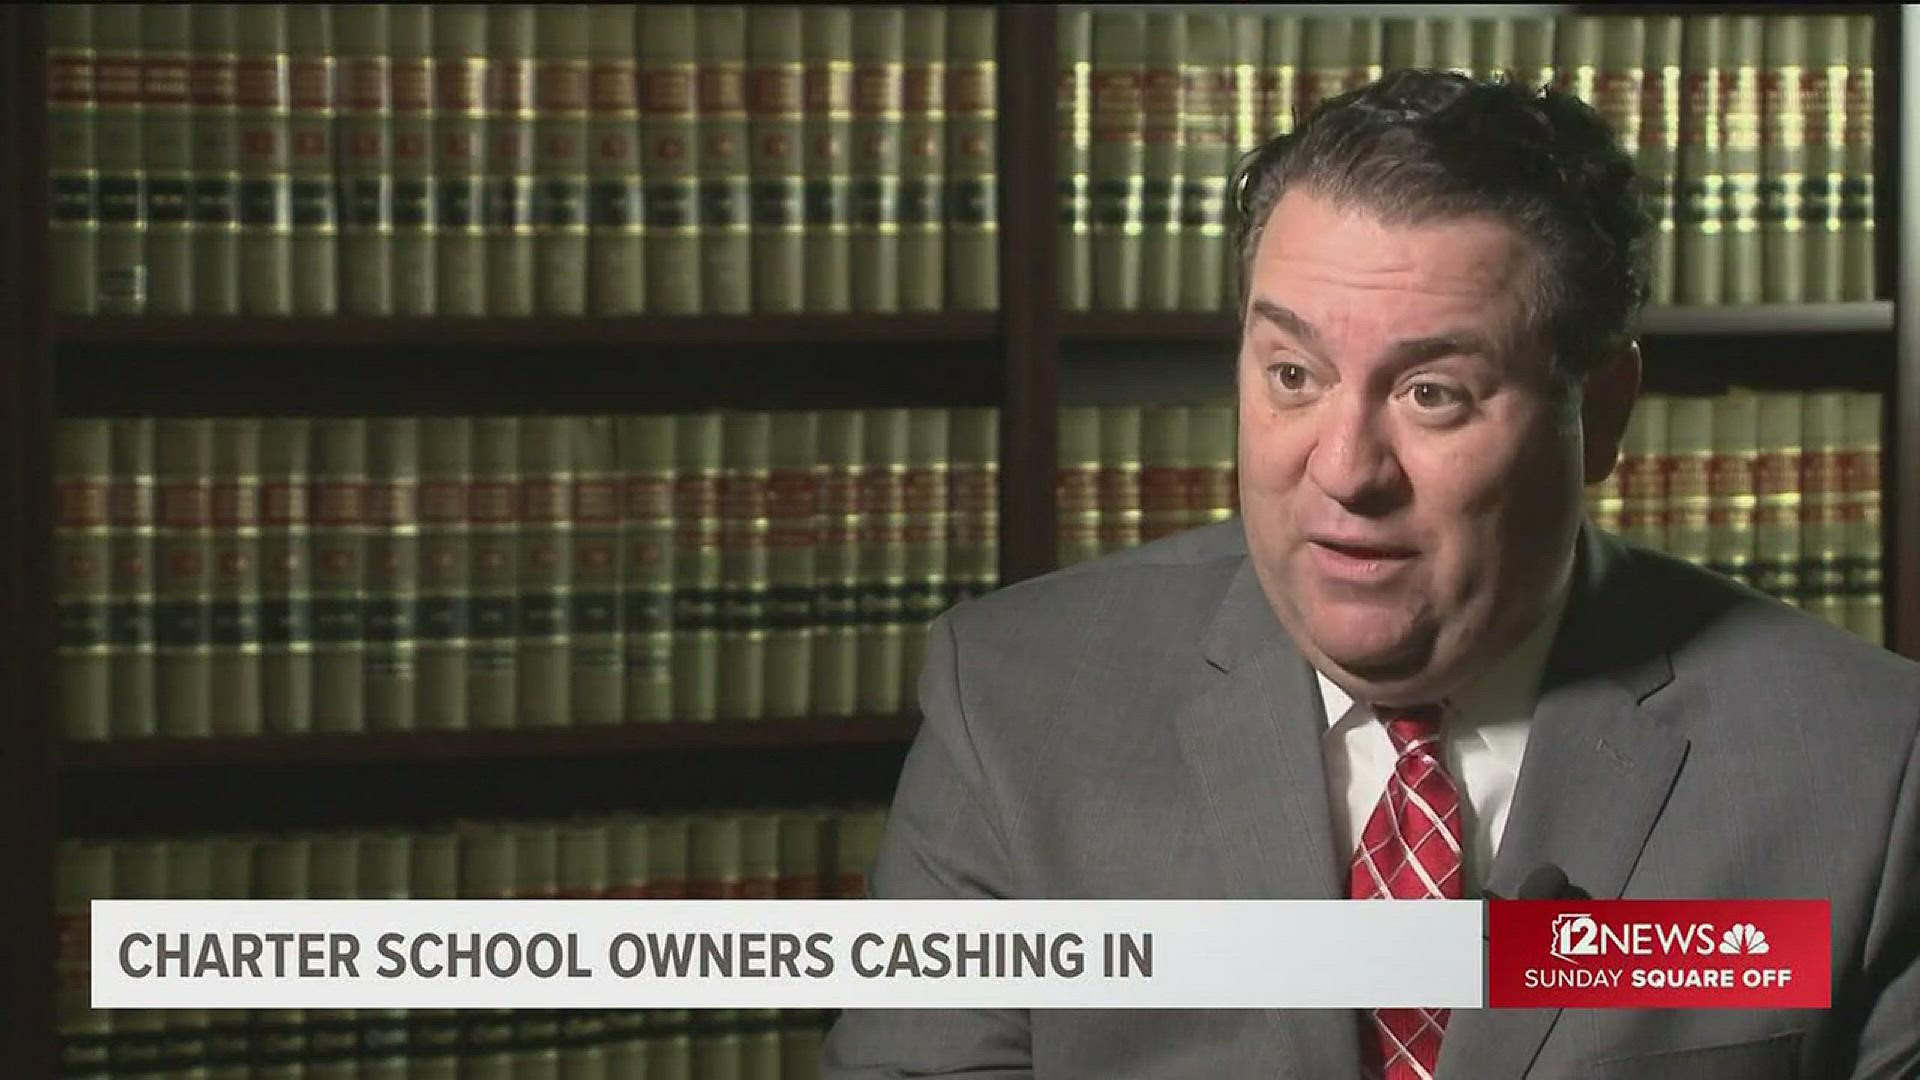 The Arizona Republic's Craig Harris discusses his reporting on charter school millionaires. There are new calls for greater accountability in how charter owners spend public tax dollars.